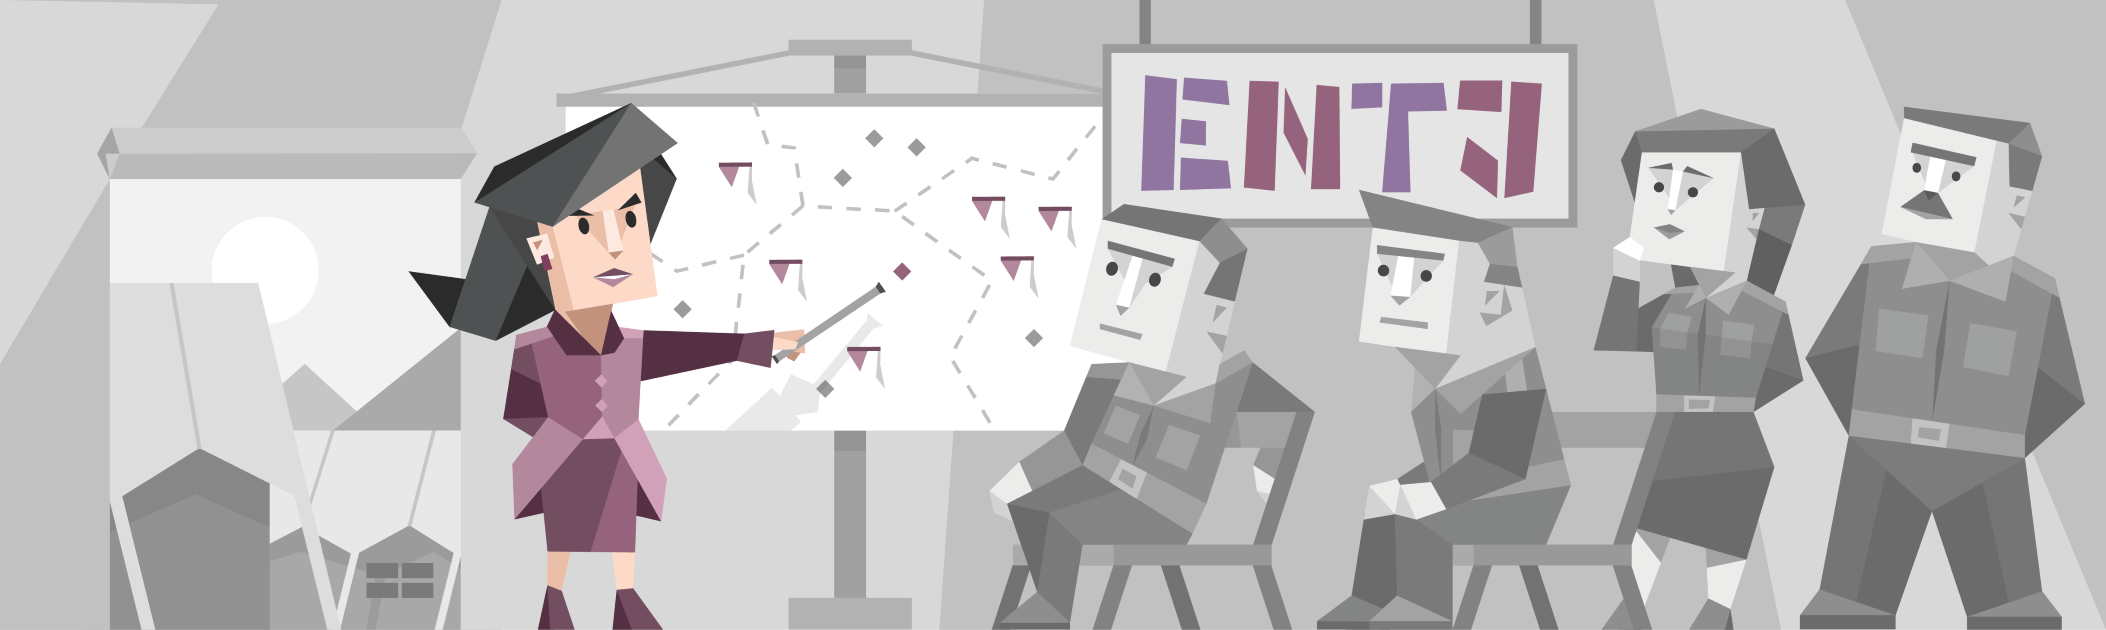 ENTJ Personality (“The Commander”) | 16Personalities